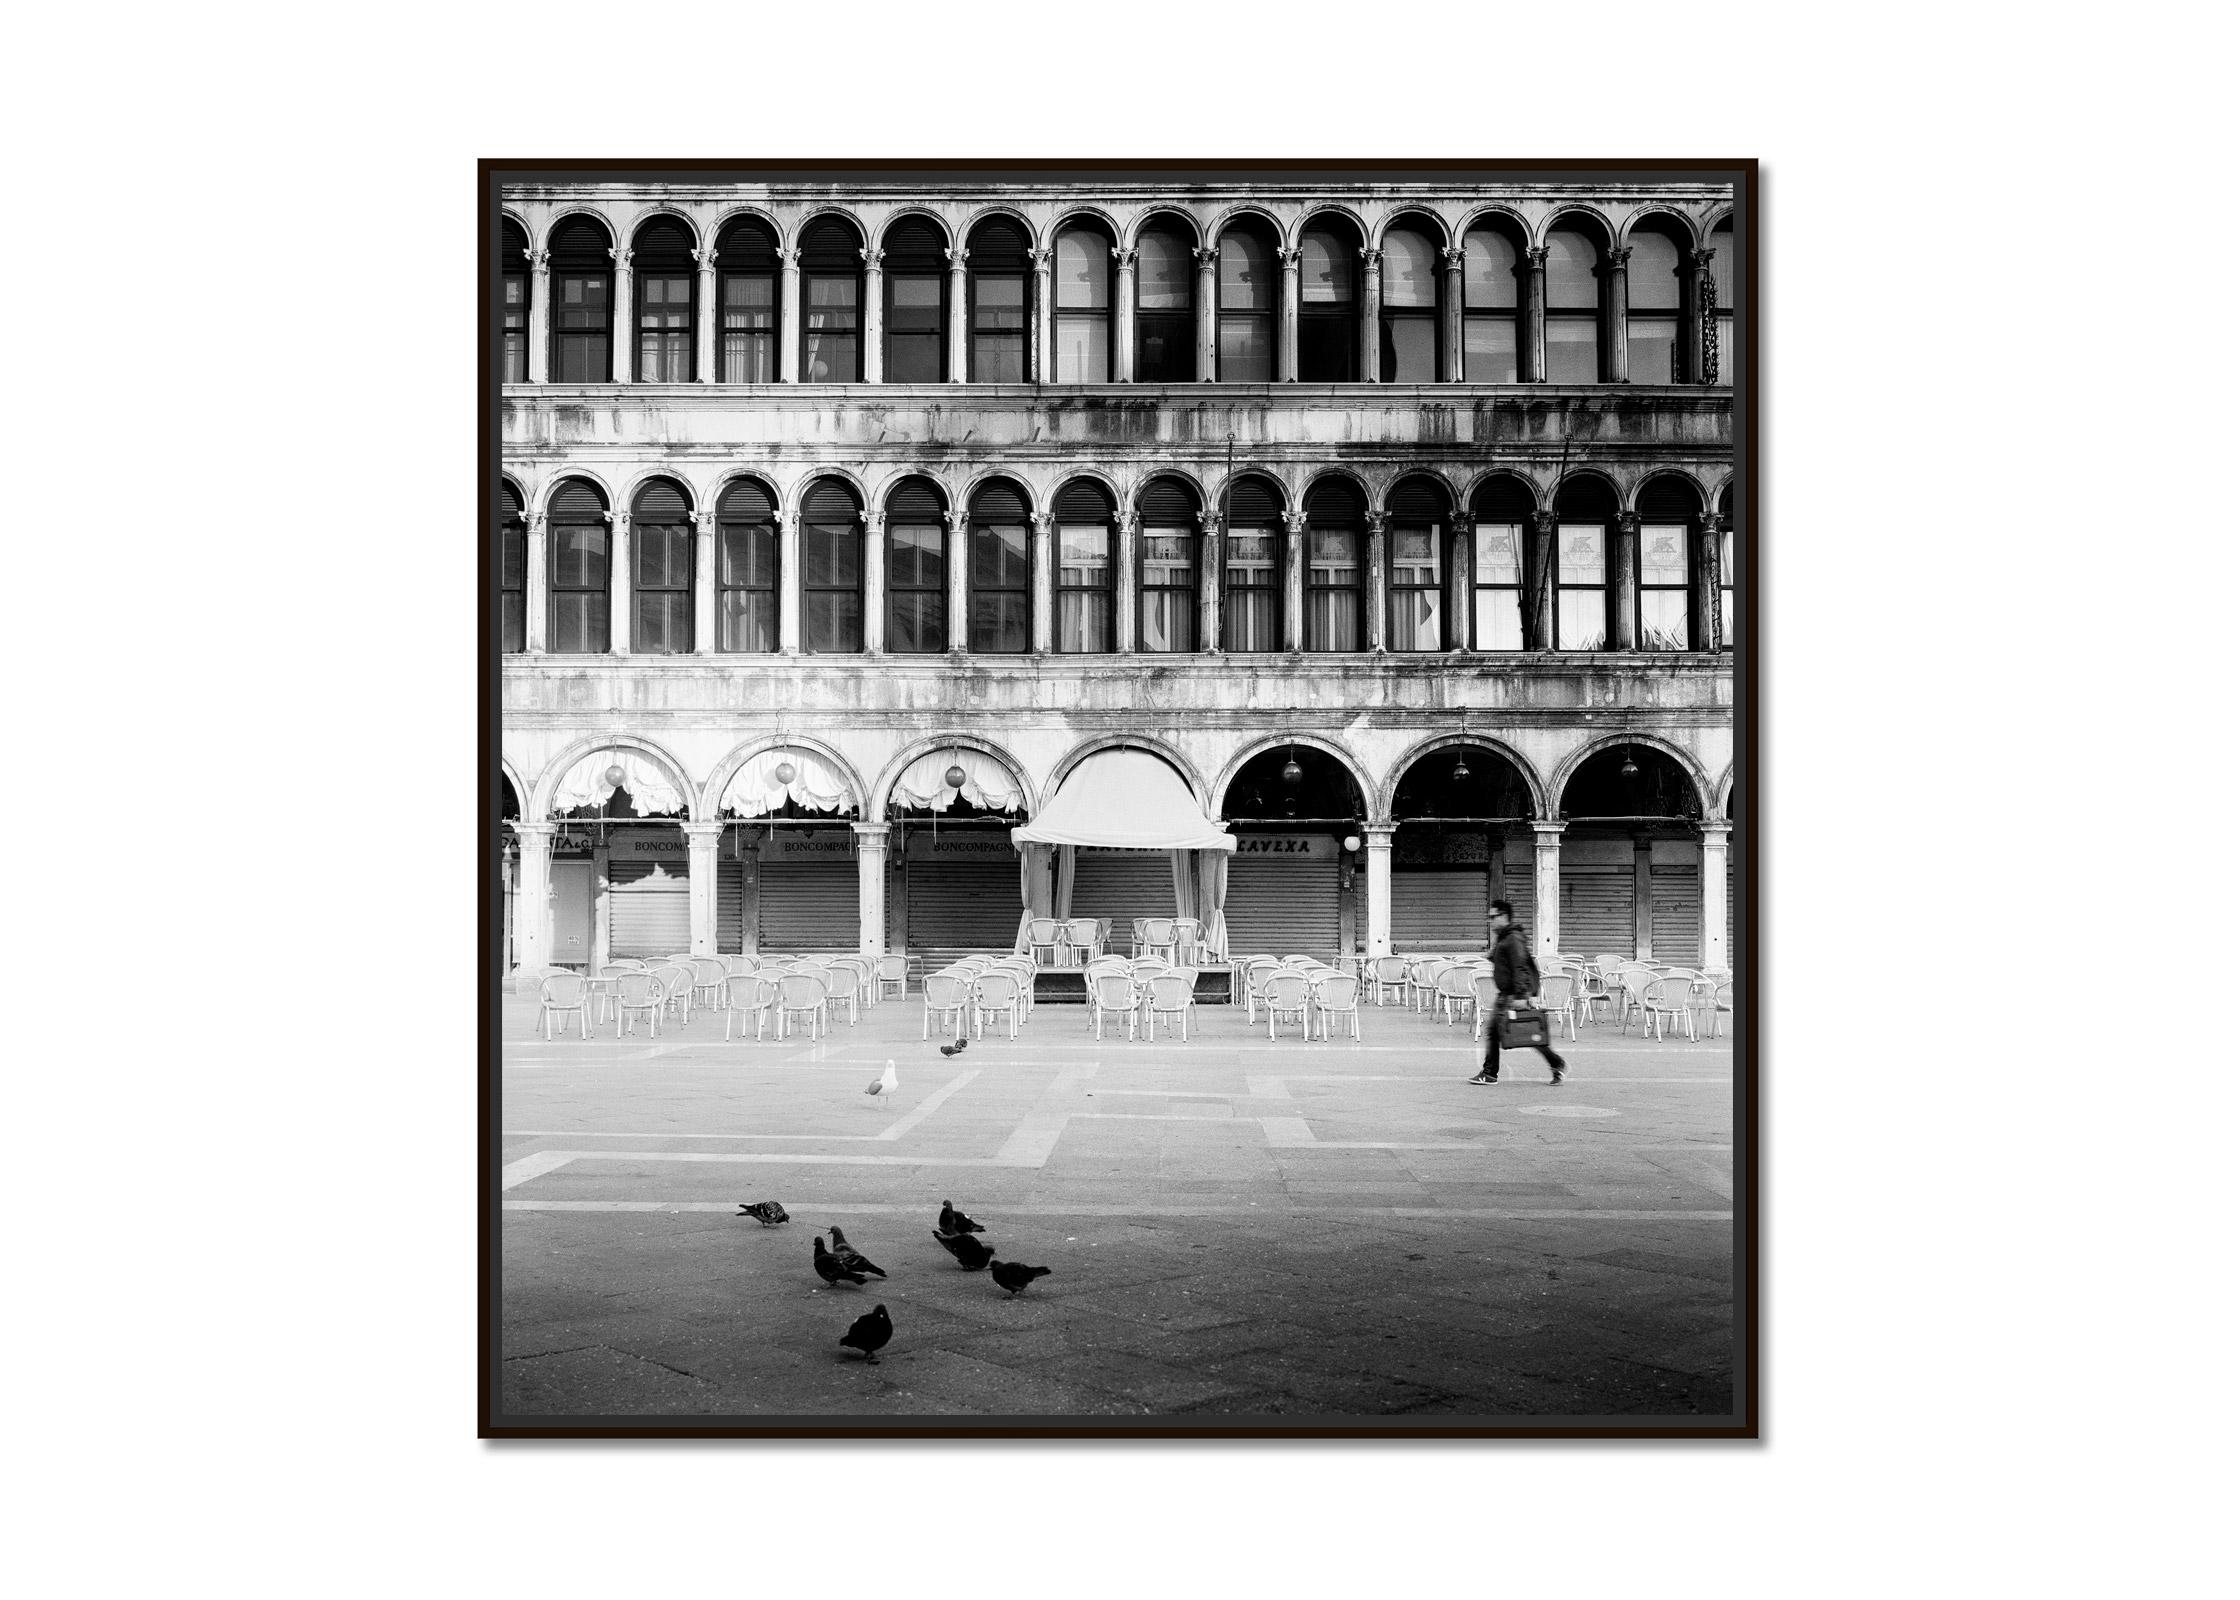 Caffe Florian San Marco Venice black and white fine art cityscape photography - Photograph by Gerald Berghammer